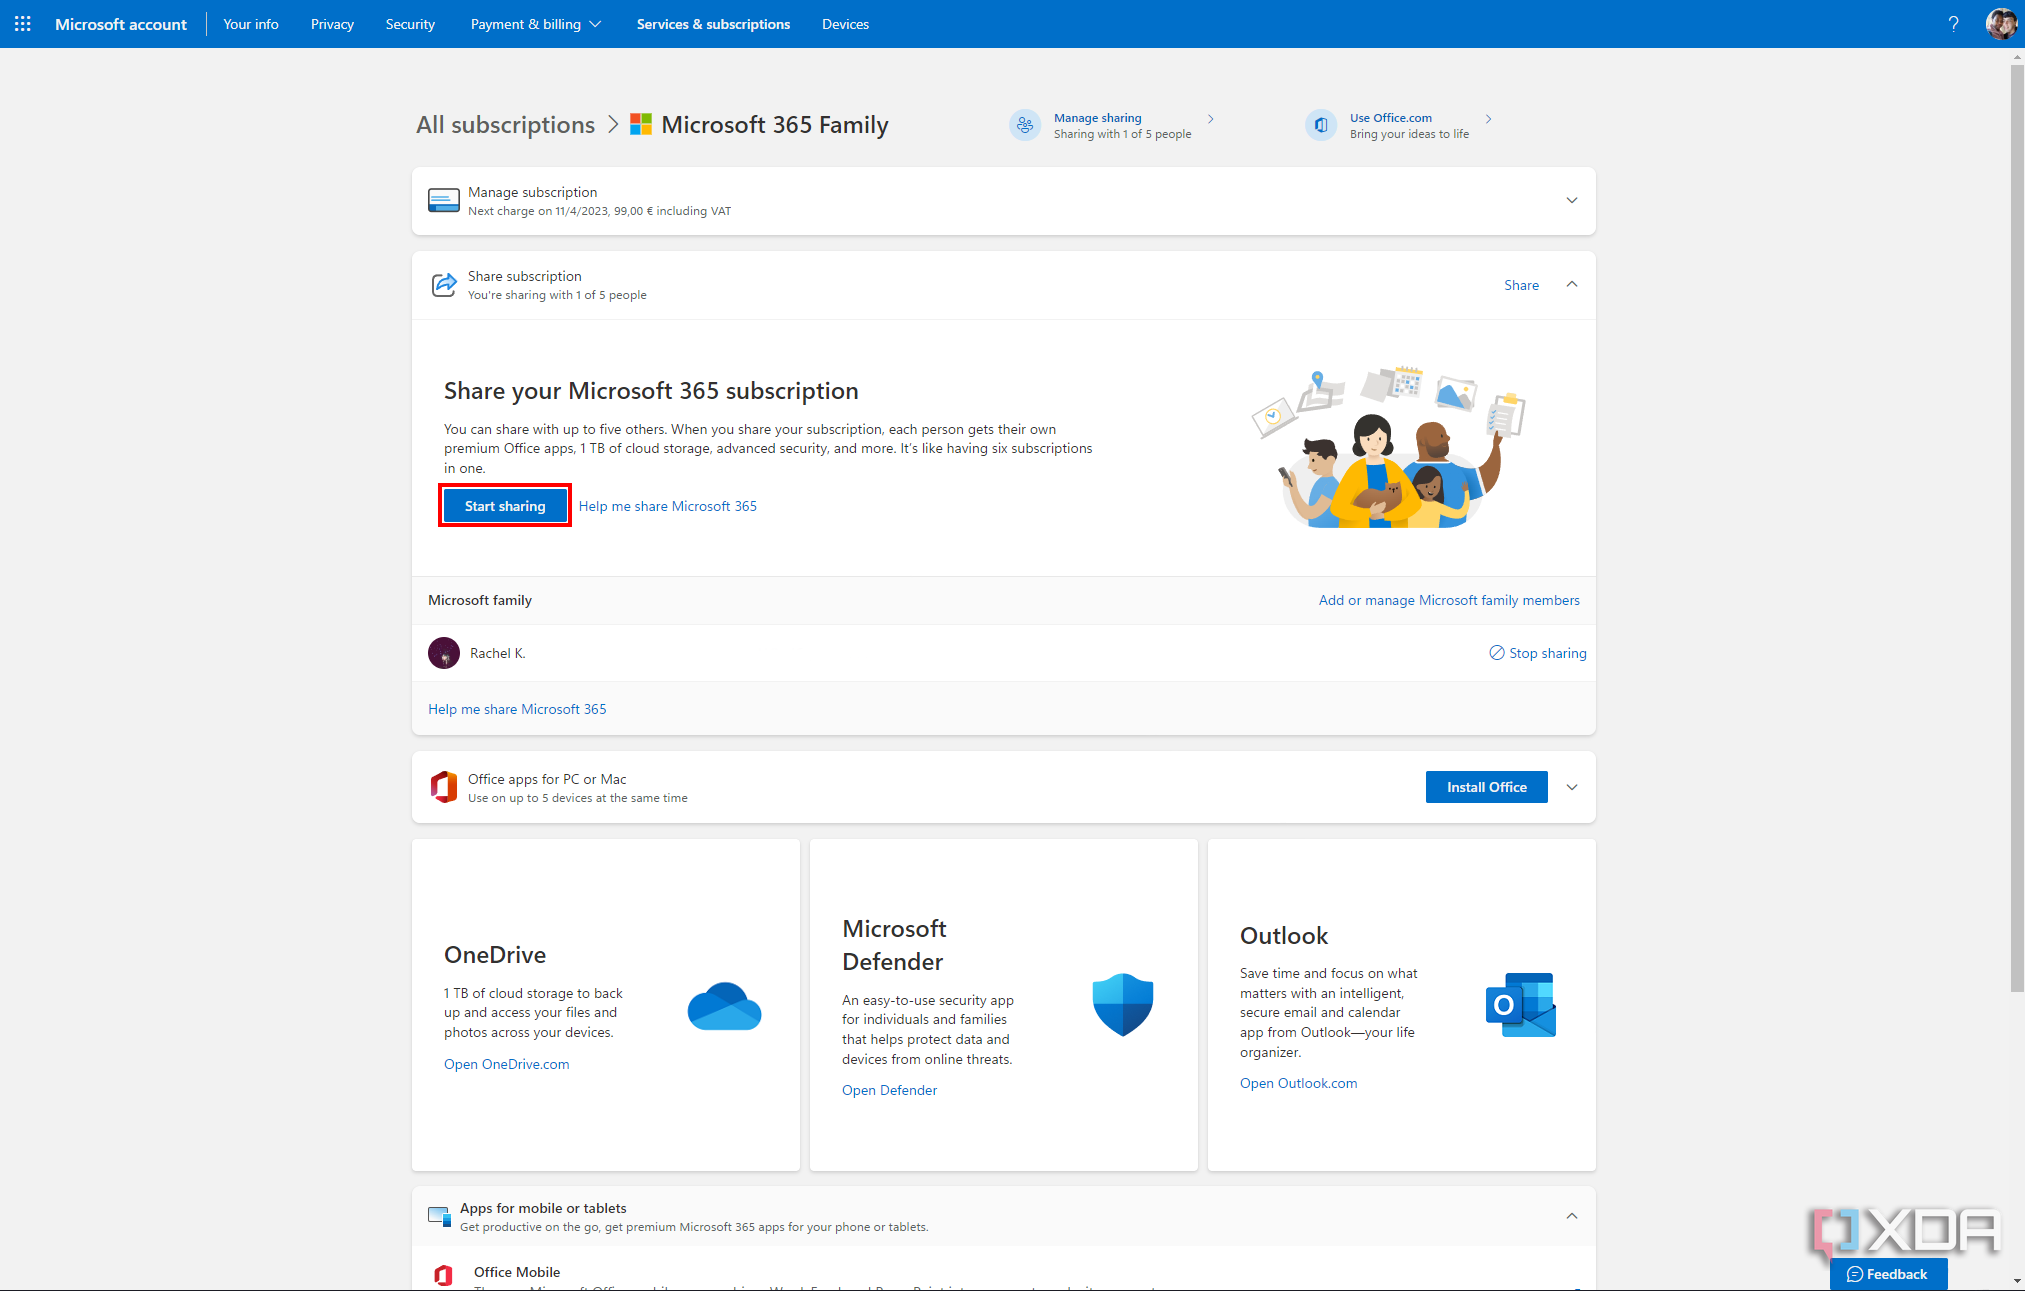 Screenshot of the Microsoft services page on Microsoft's website with the Start sharing button highlighted